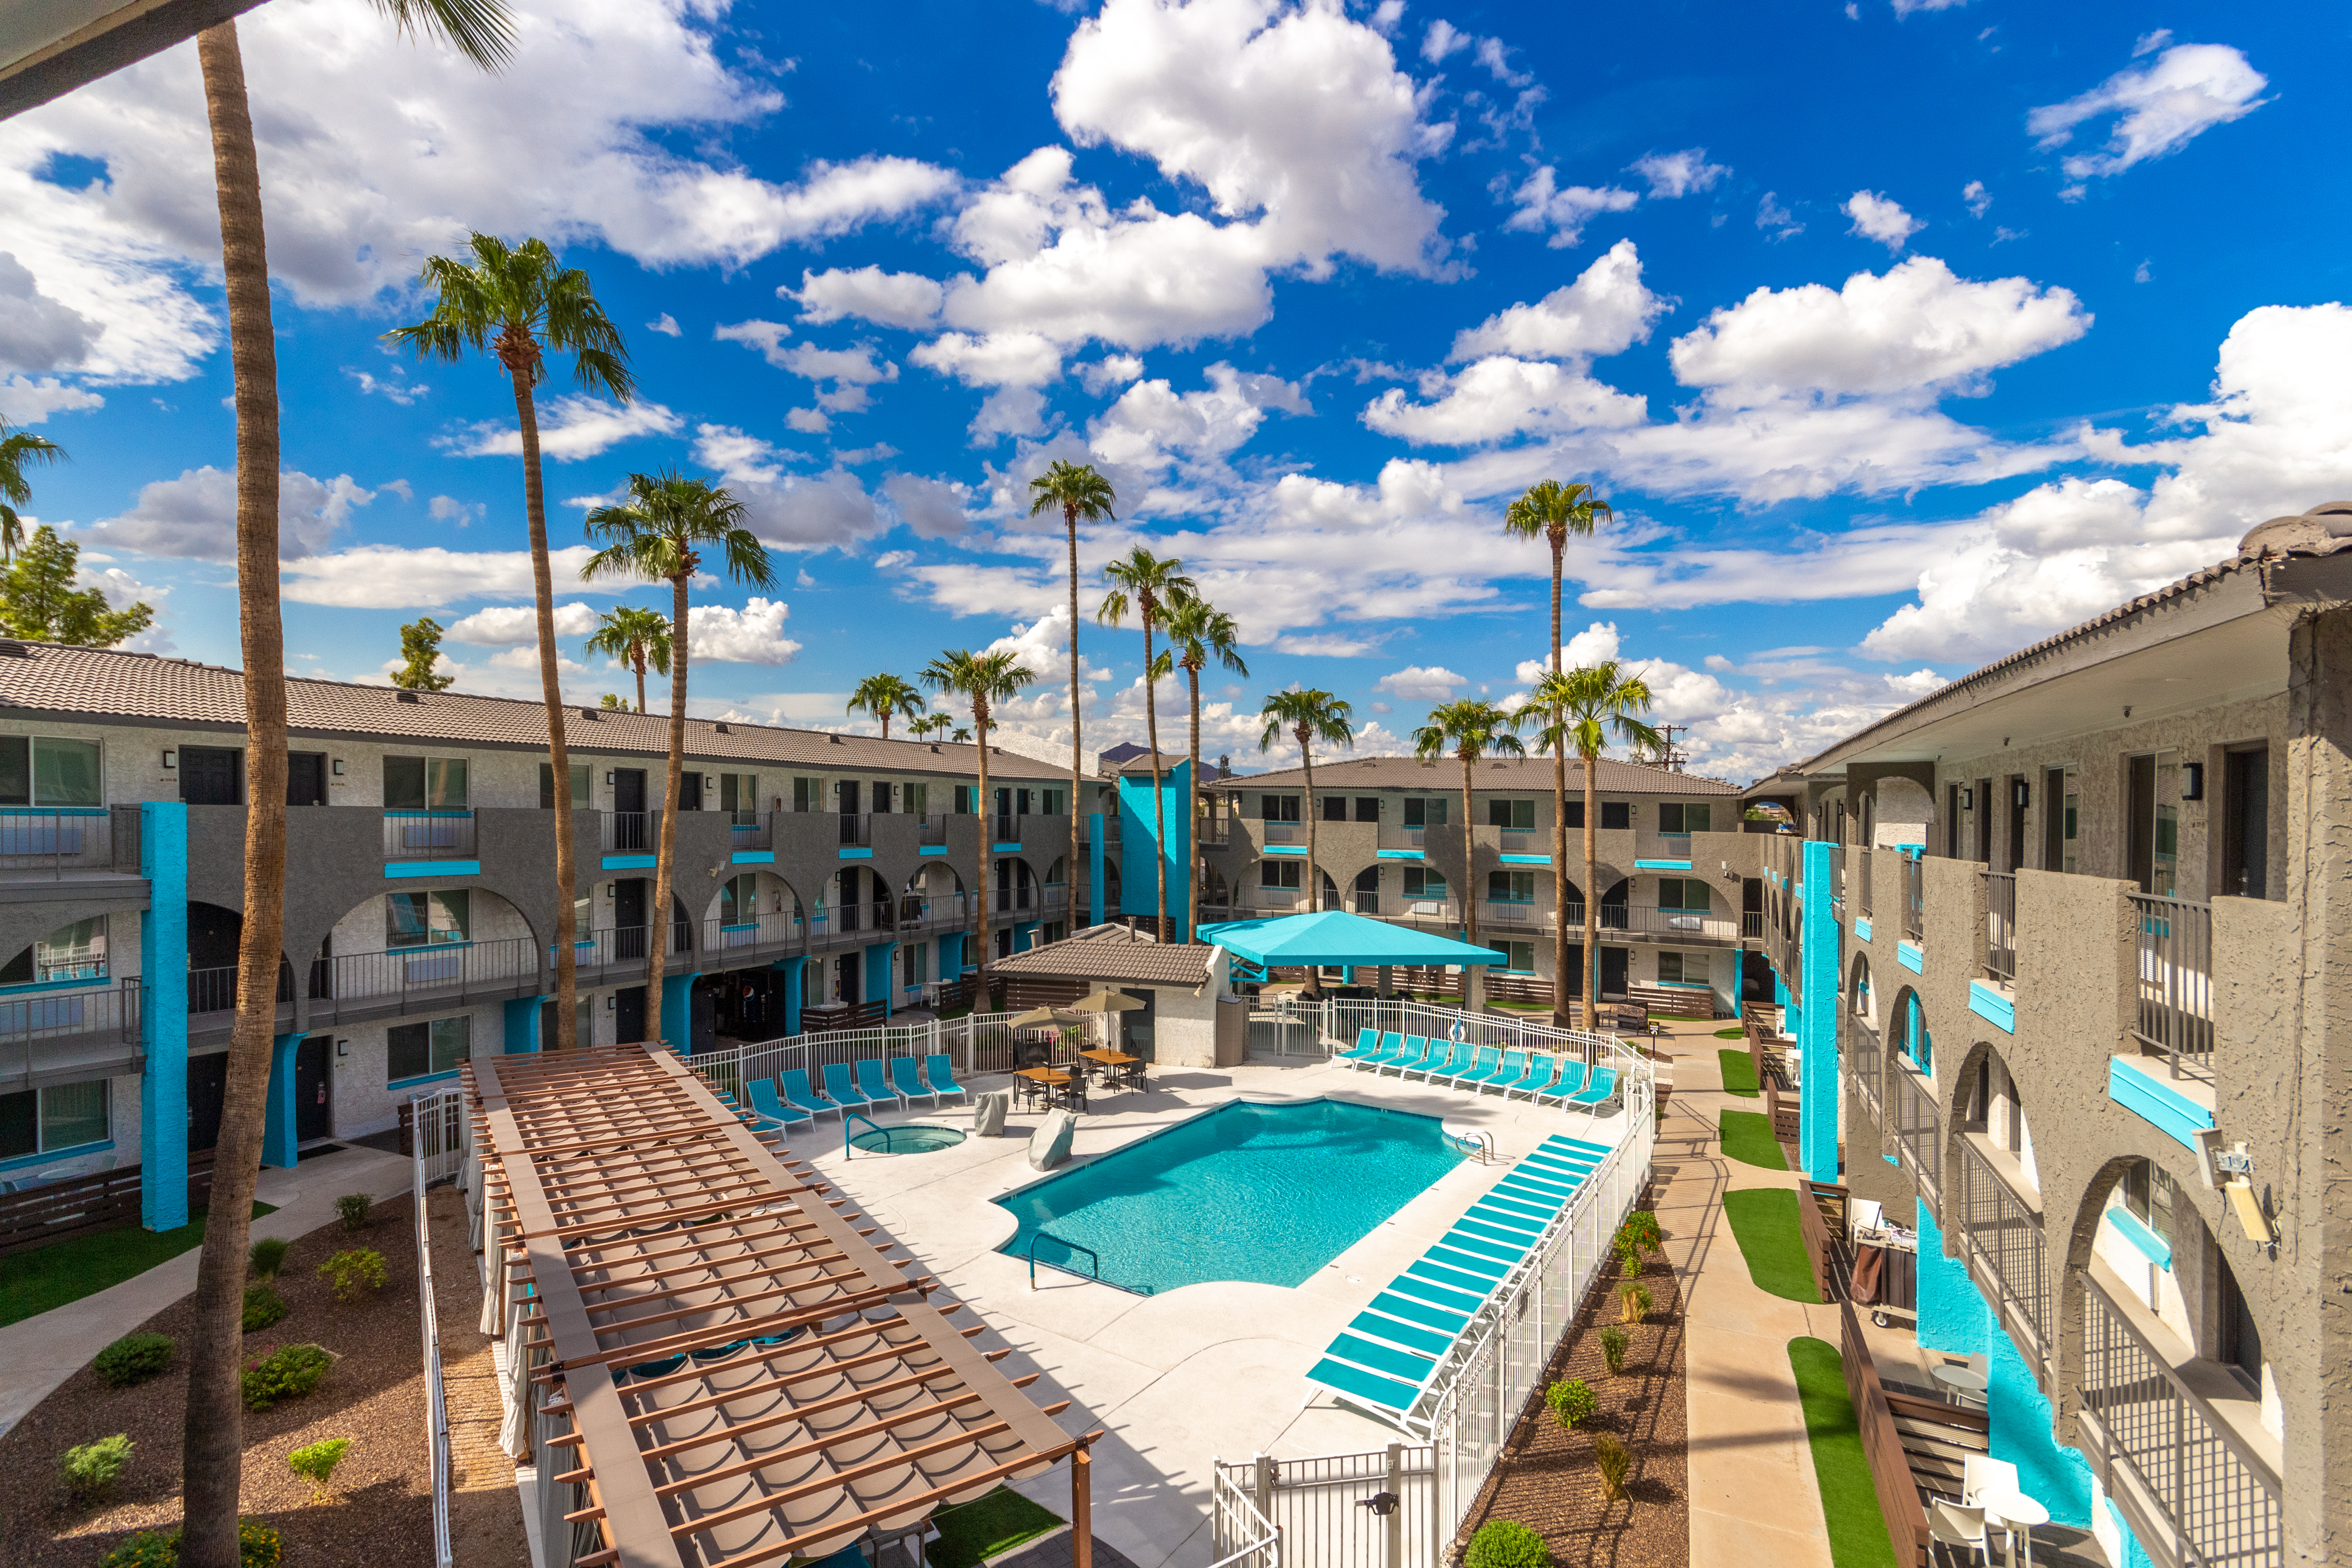 Featuring free high-speed Wi-Fi, swimming pool & cabanas, fitness room and a central location, Hotel Bixby offers the best value in the Valley.